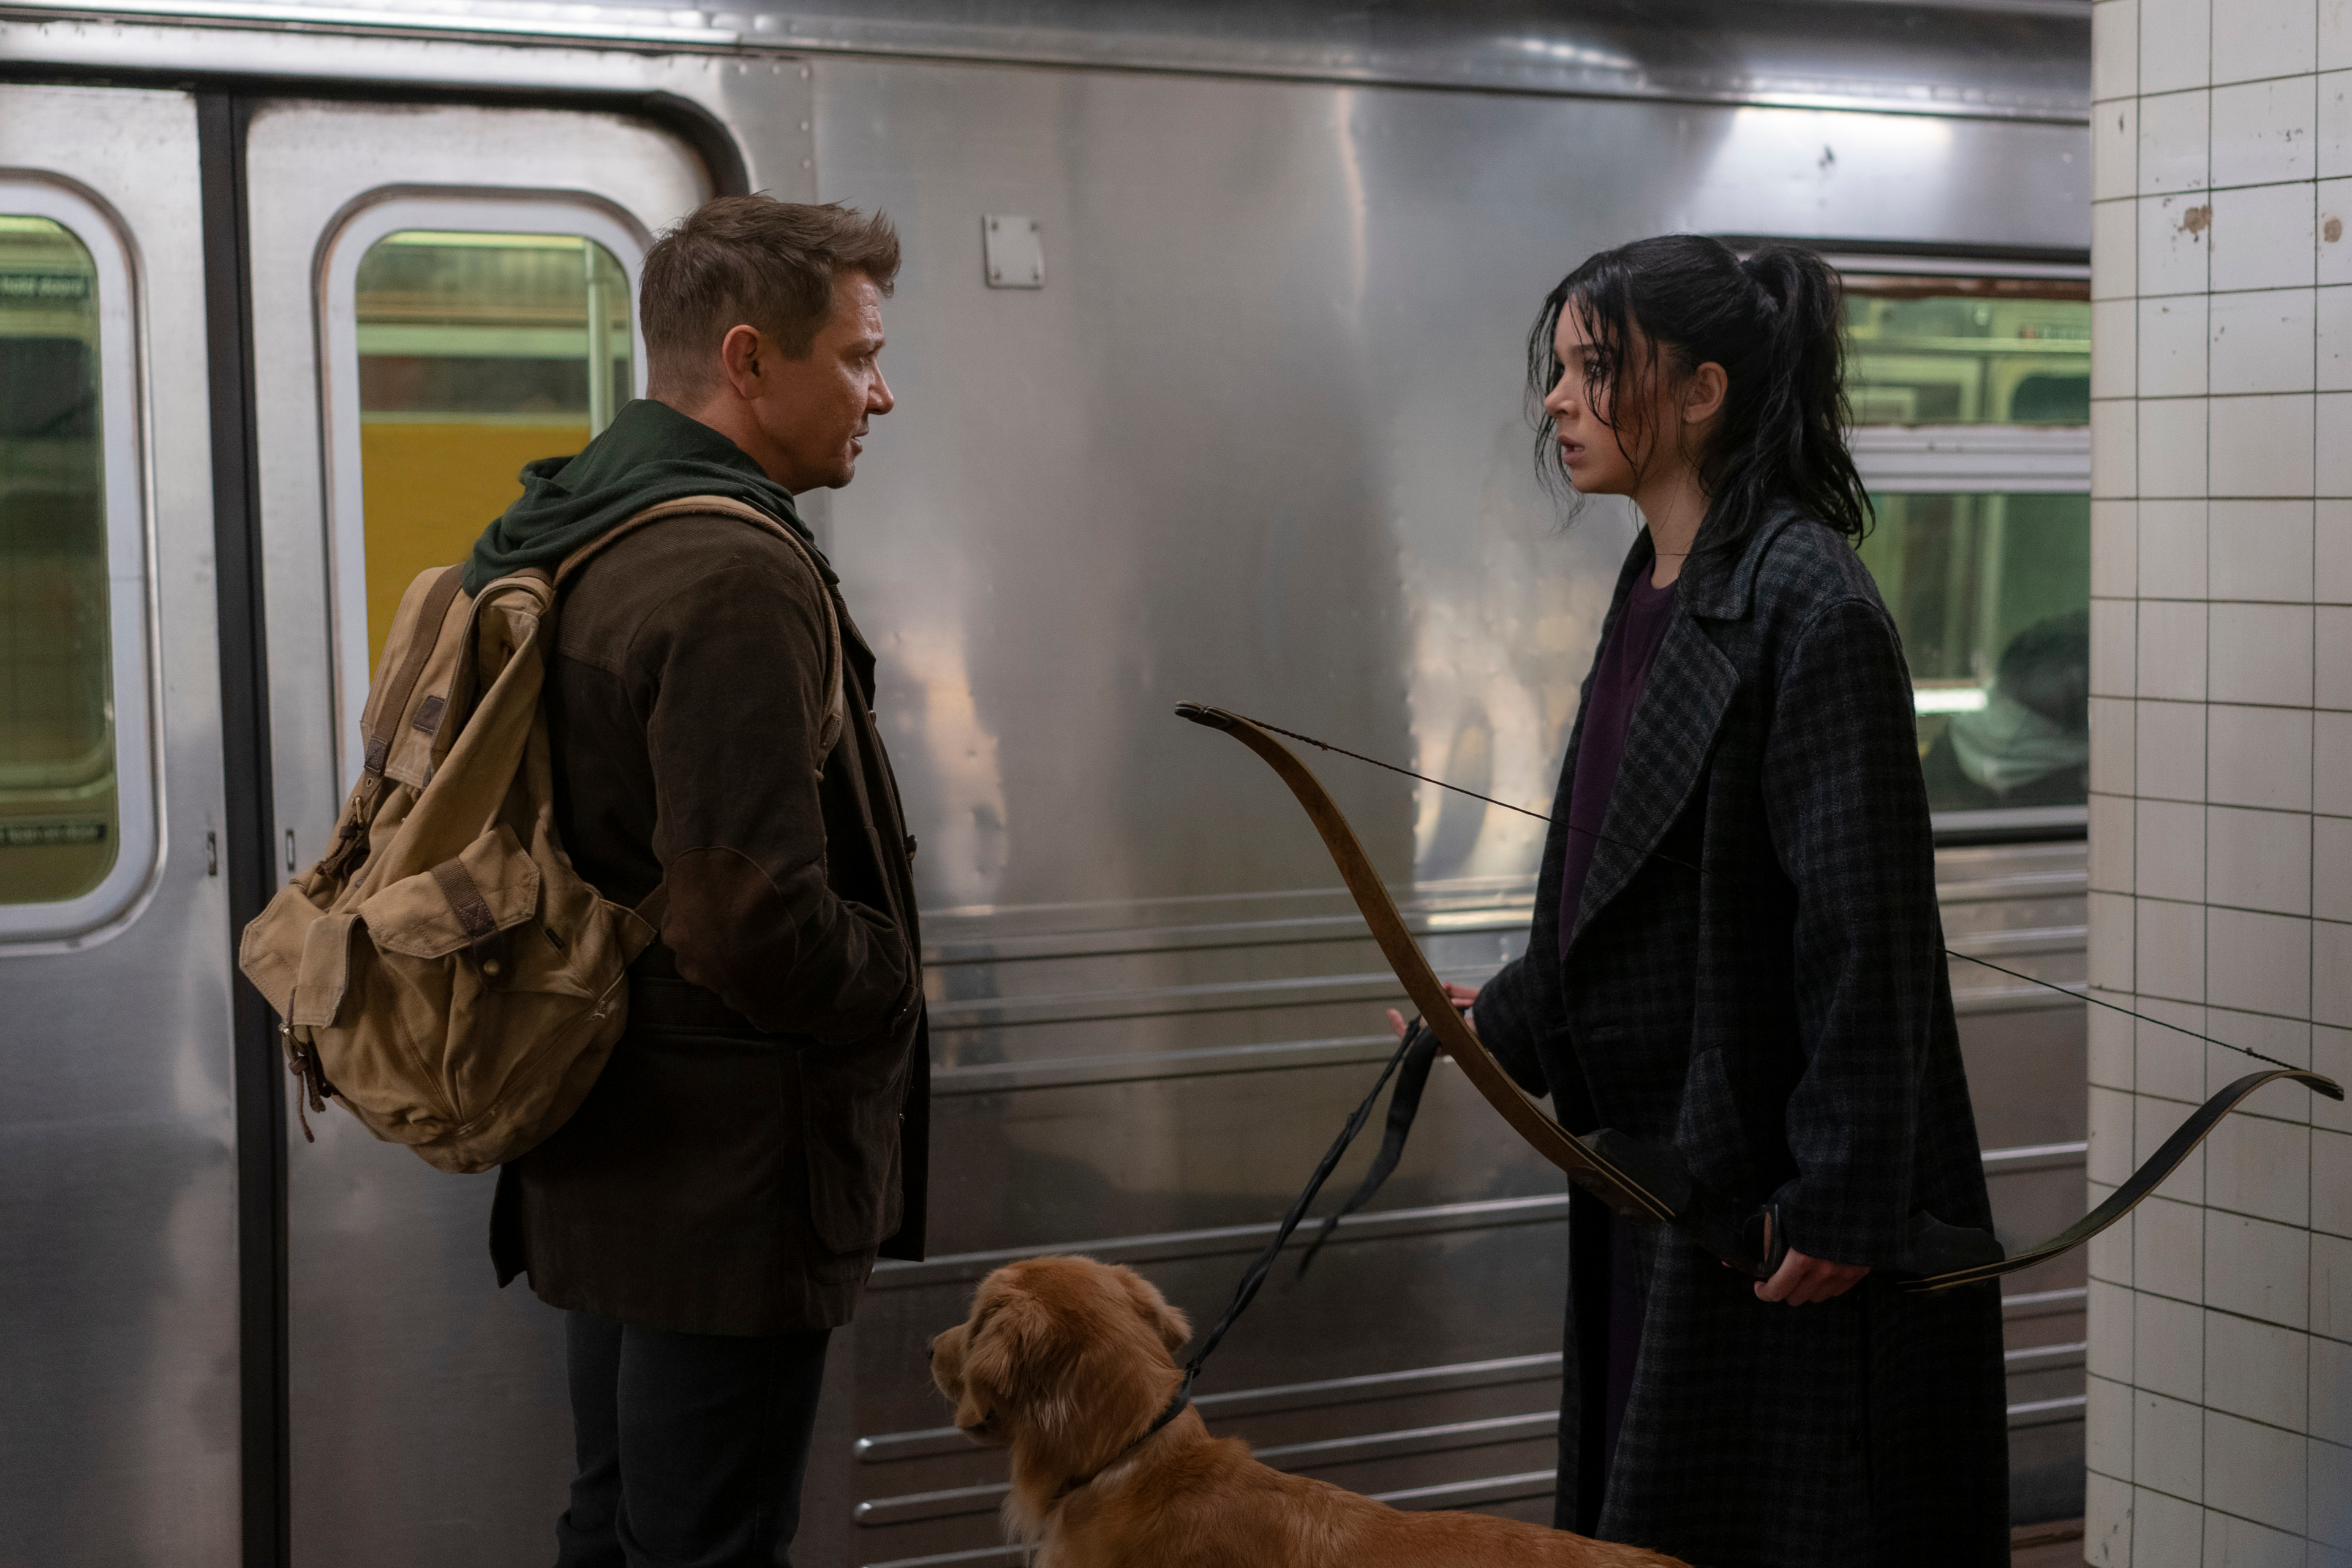 tv show, hawkeye, clint barton, hailee steinfeld, jeremy renner, kate bishop, lucky the pizza dog